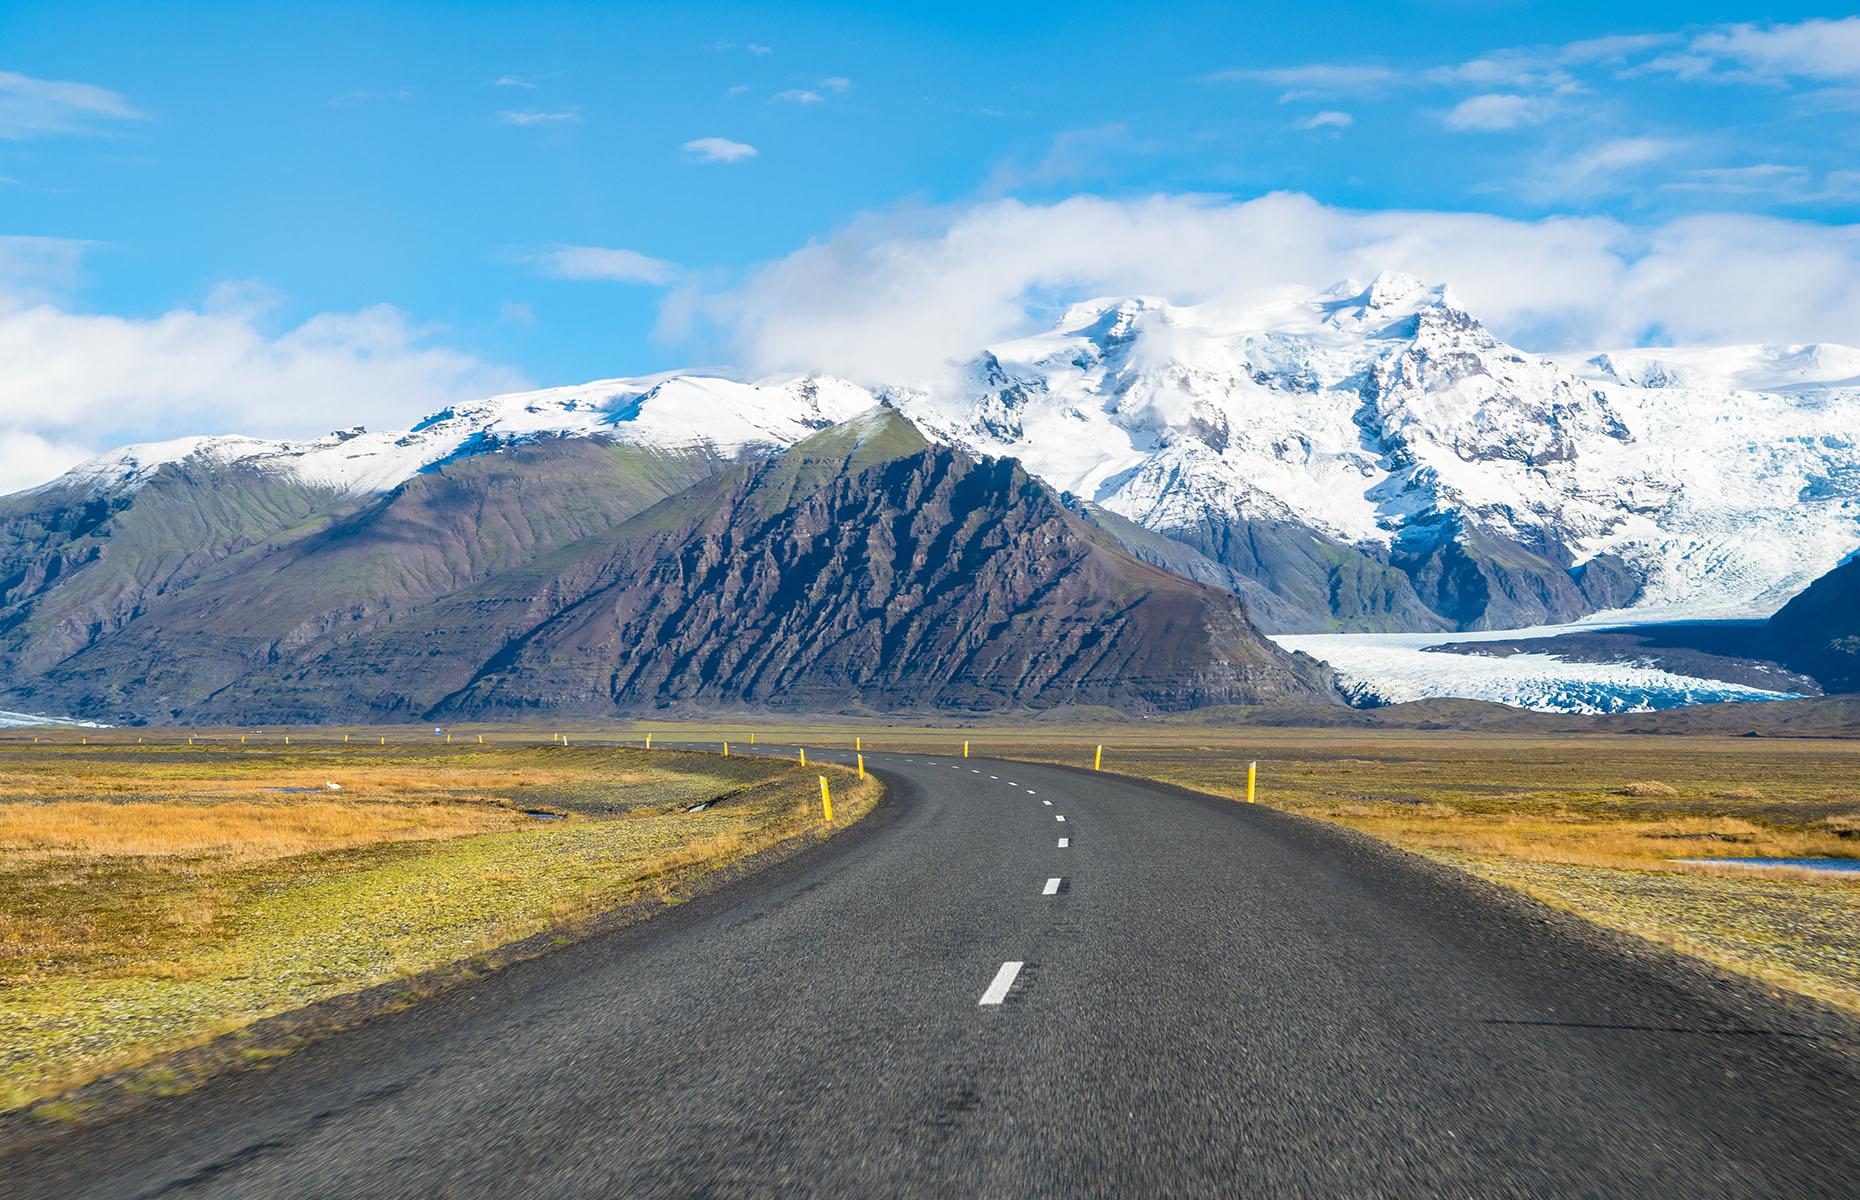 <p>From glistening ice caves to ebony beaches and sulfurous hot springs, an Icelandic road trip is a feast for all the senses. As its name suggests, the Ring Road circumnavigates the country, stretching for 828 miles.</p>  <p>It’s wise to hire a 4X4 to make this road trip more comfortable and roads are infinitely more passable between April and September.</p>